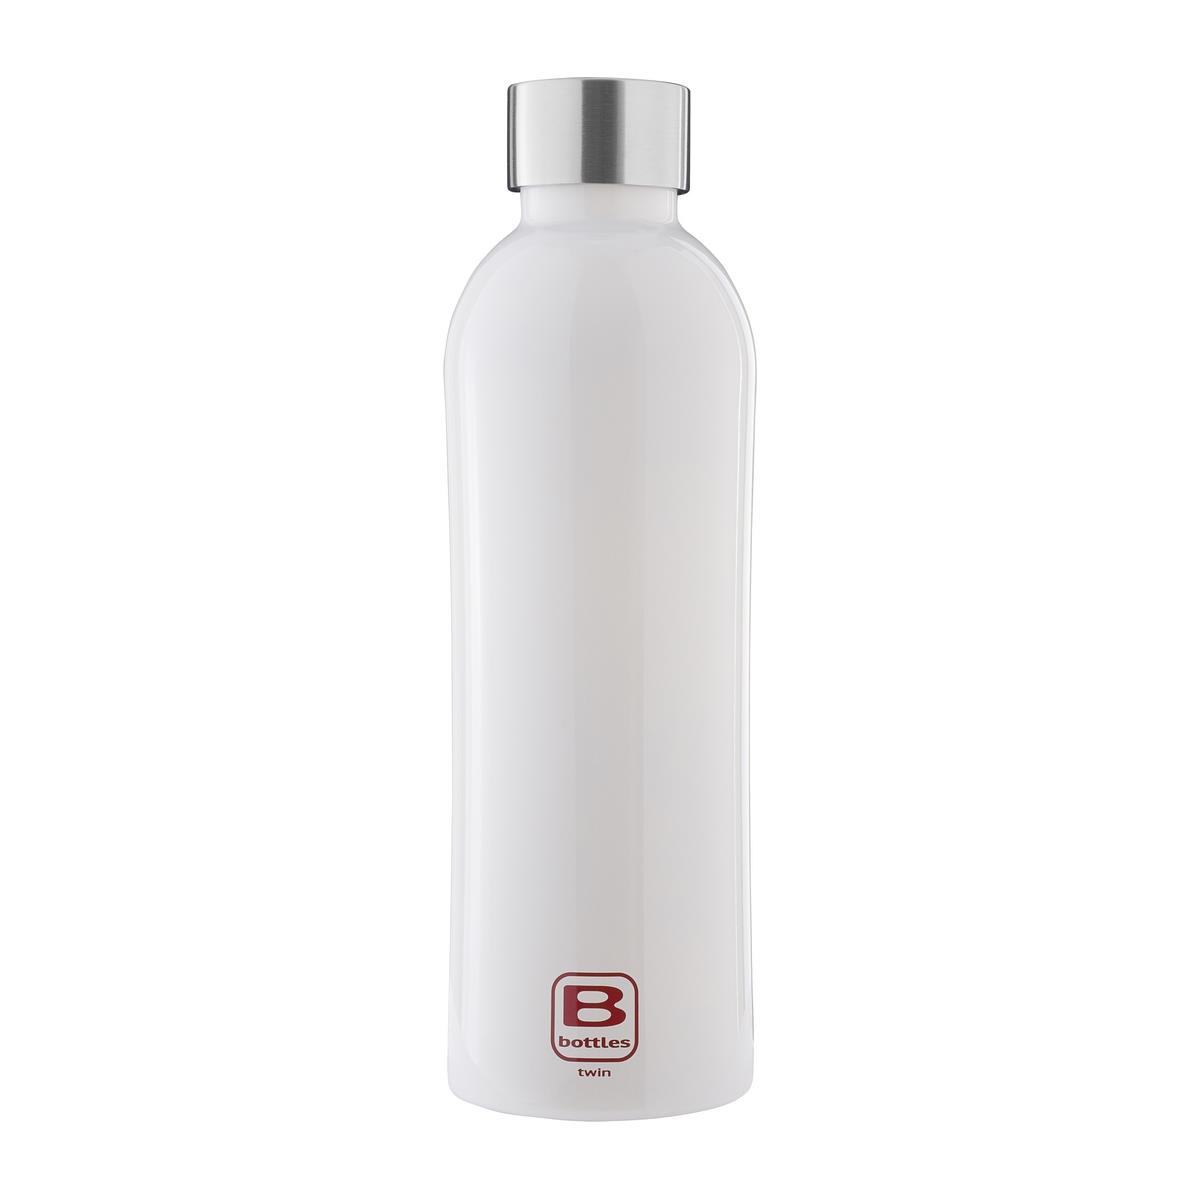 photo B Bottles Twin - Bright White - 800 ml - Double wall thermal bottle in 18/10 stainless steel